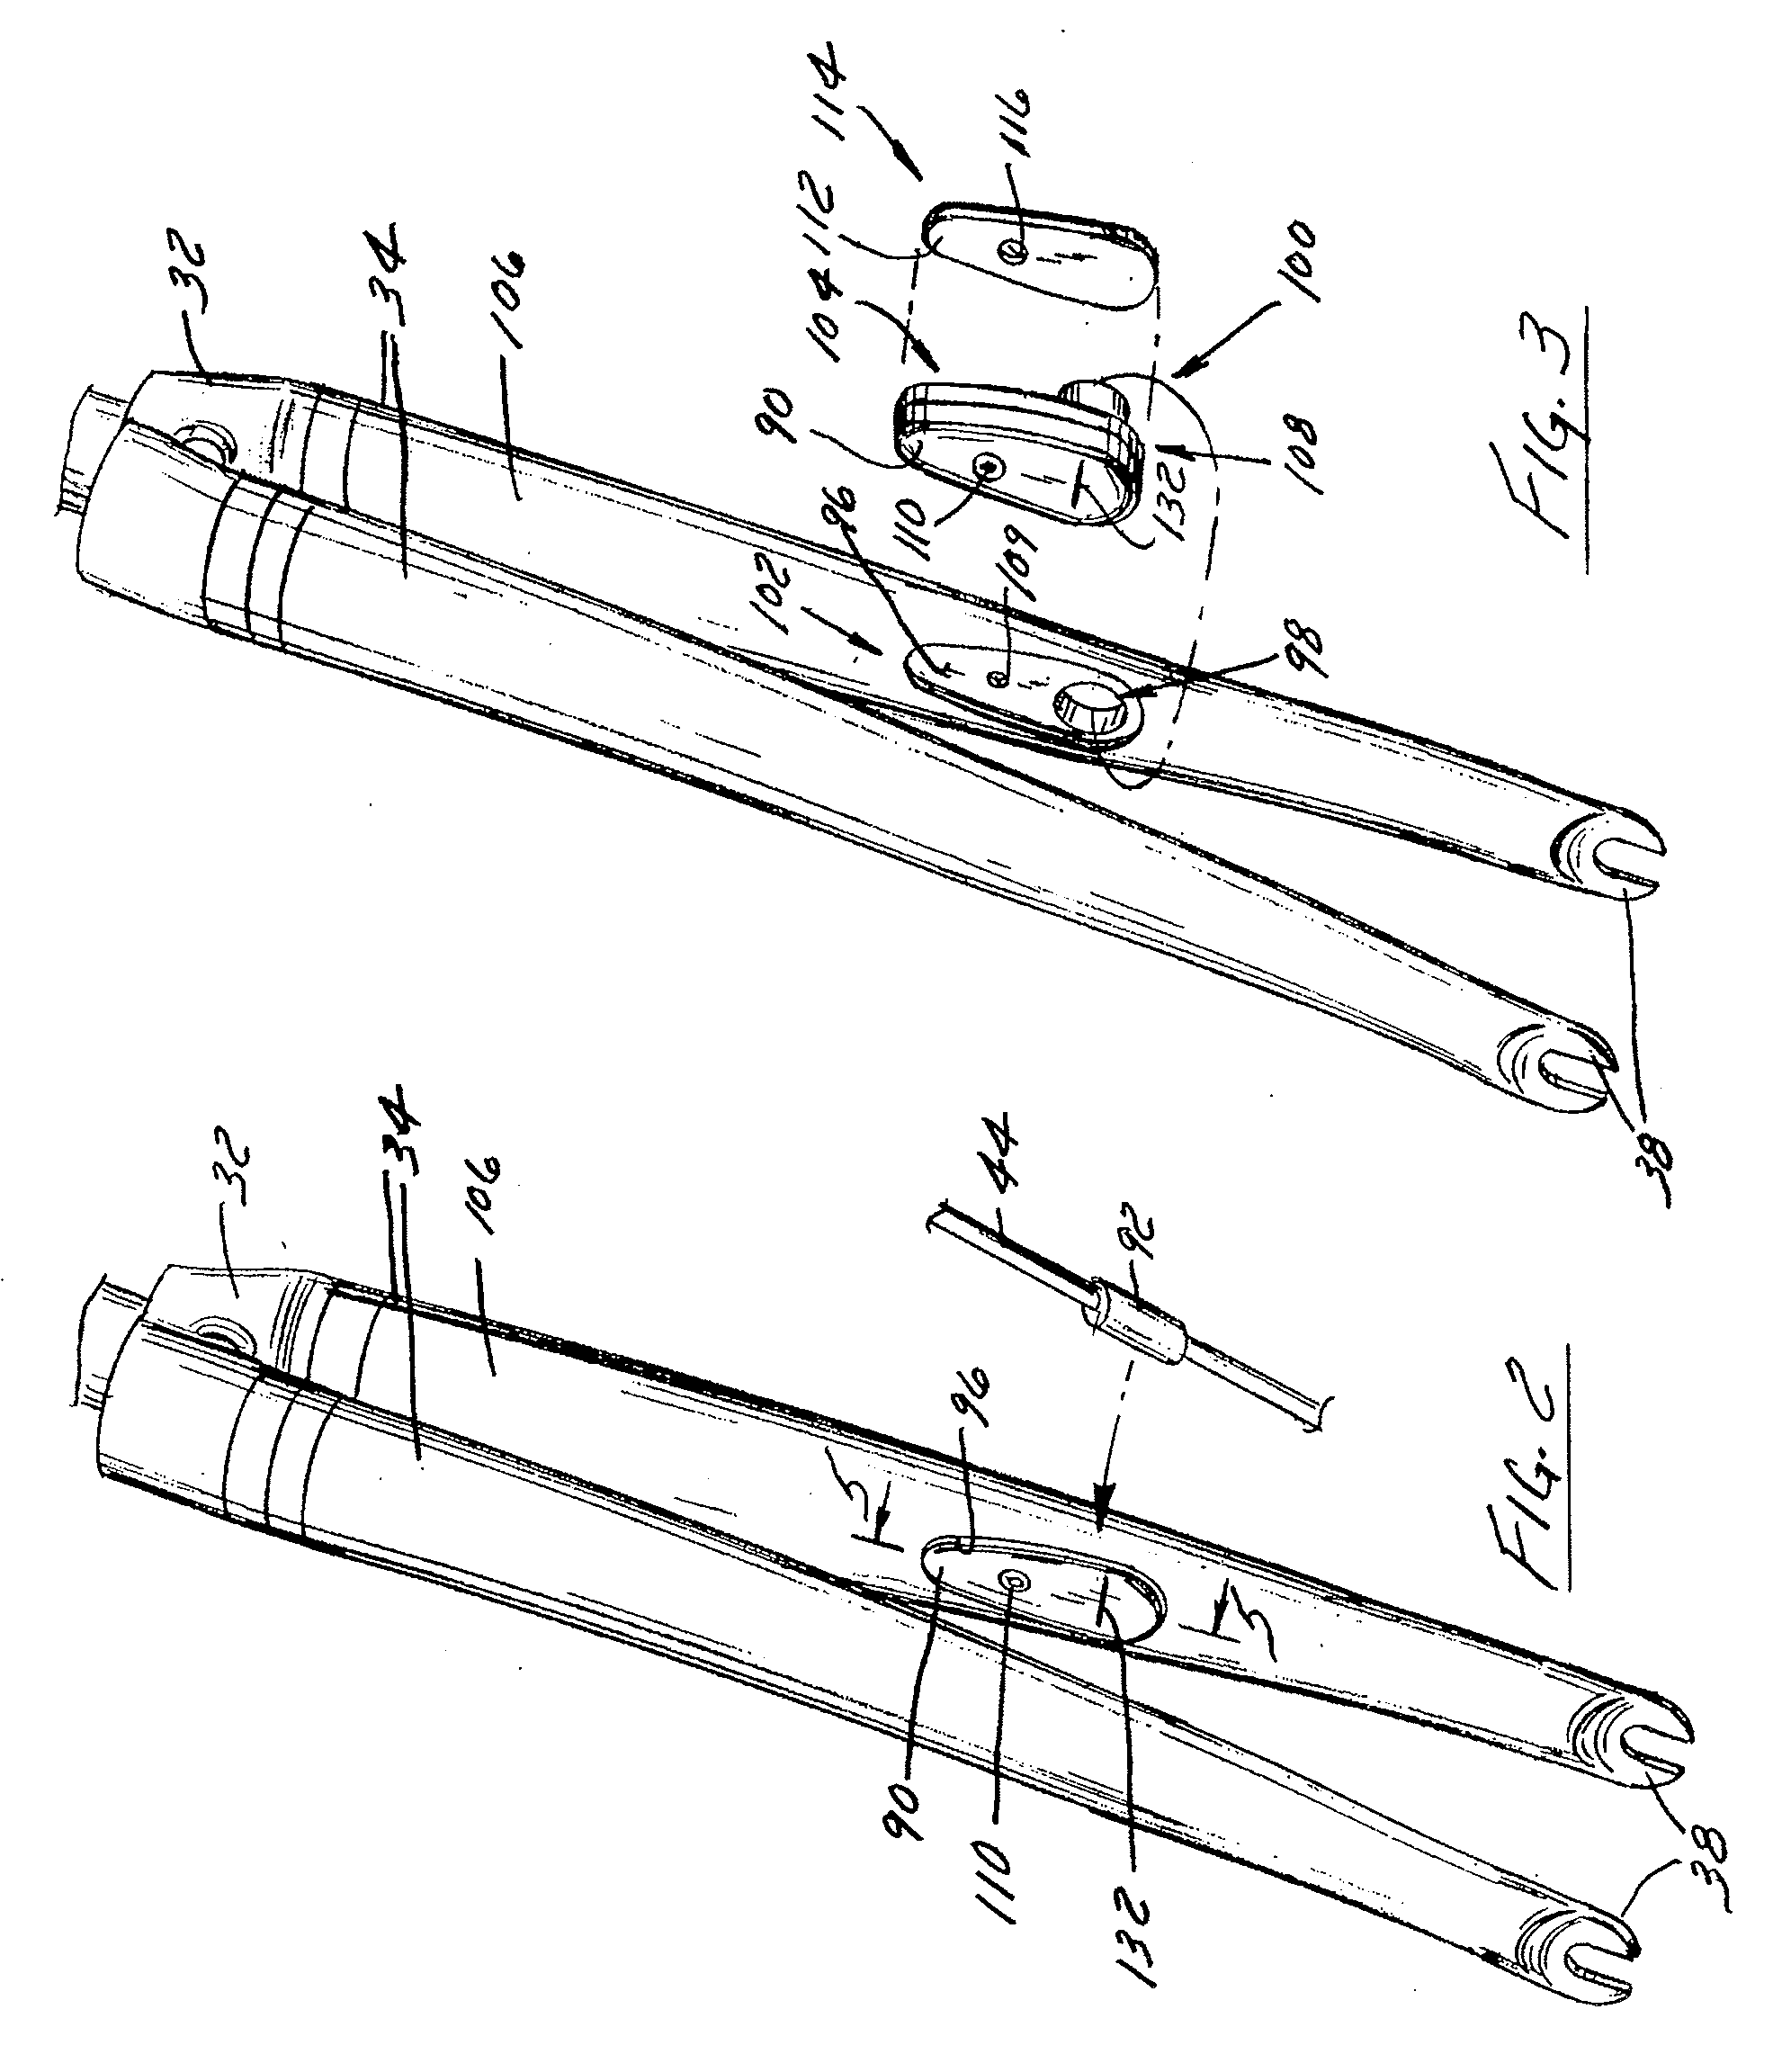 Bicycle frame with device cavity